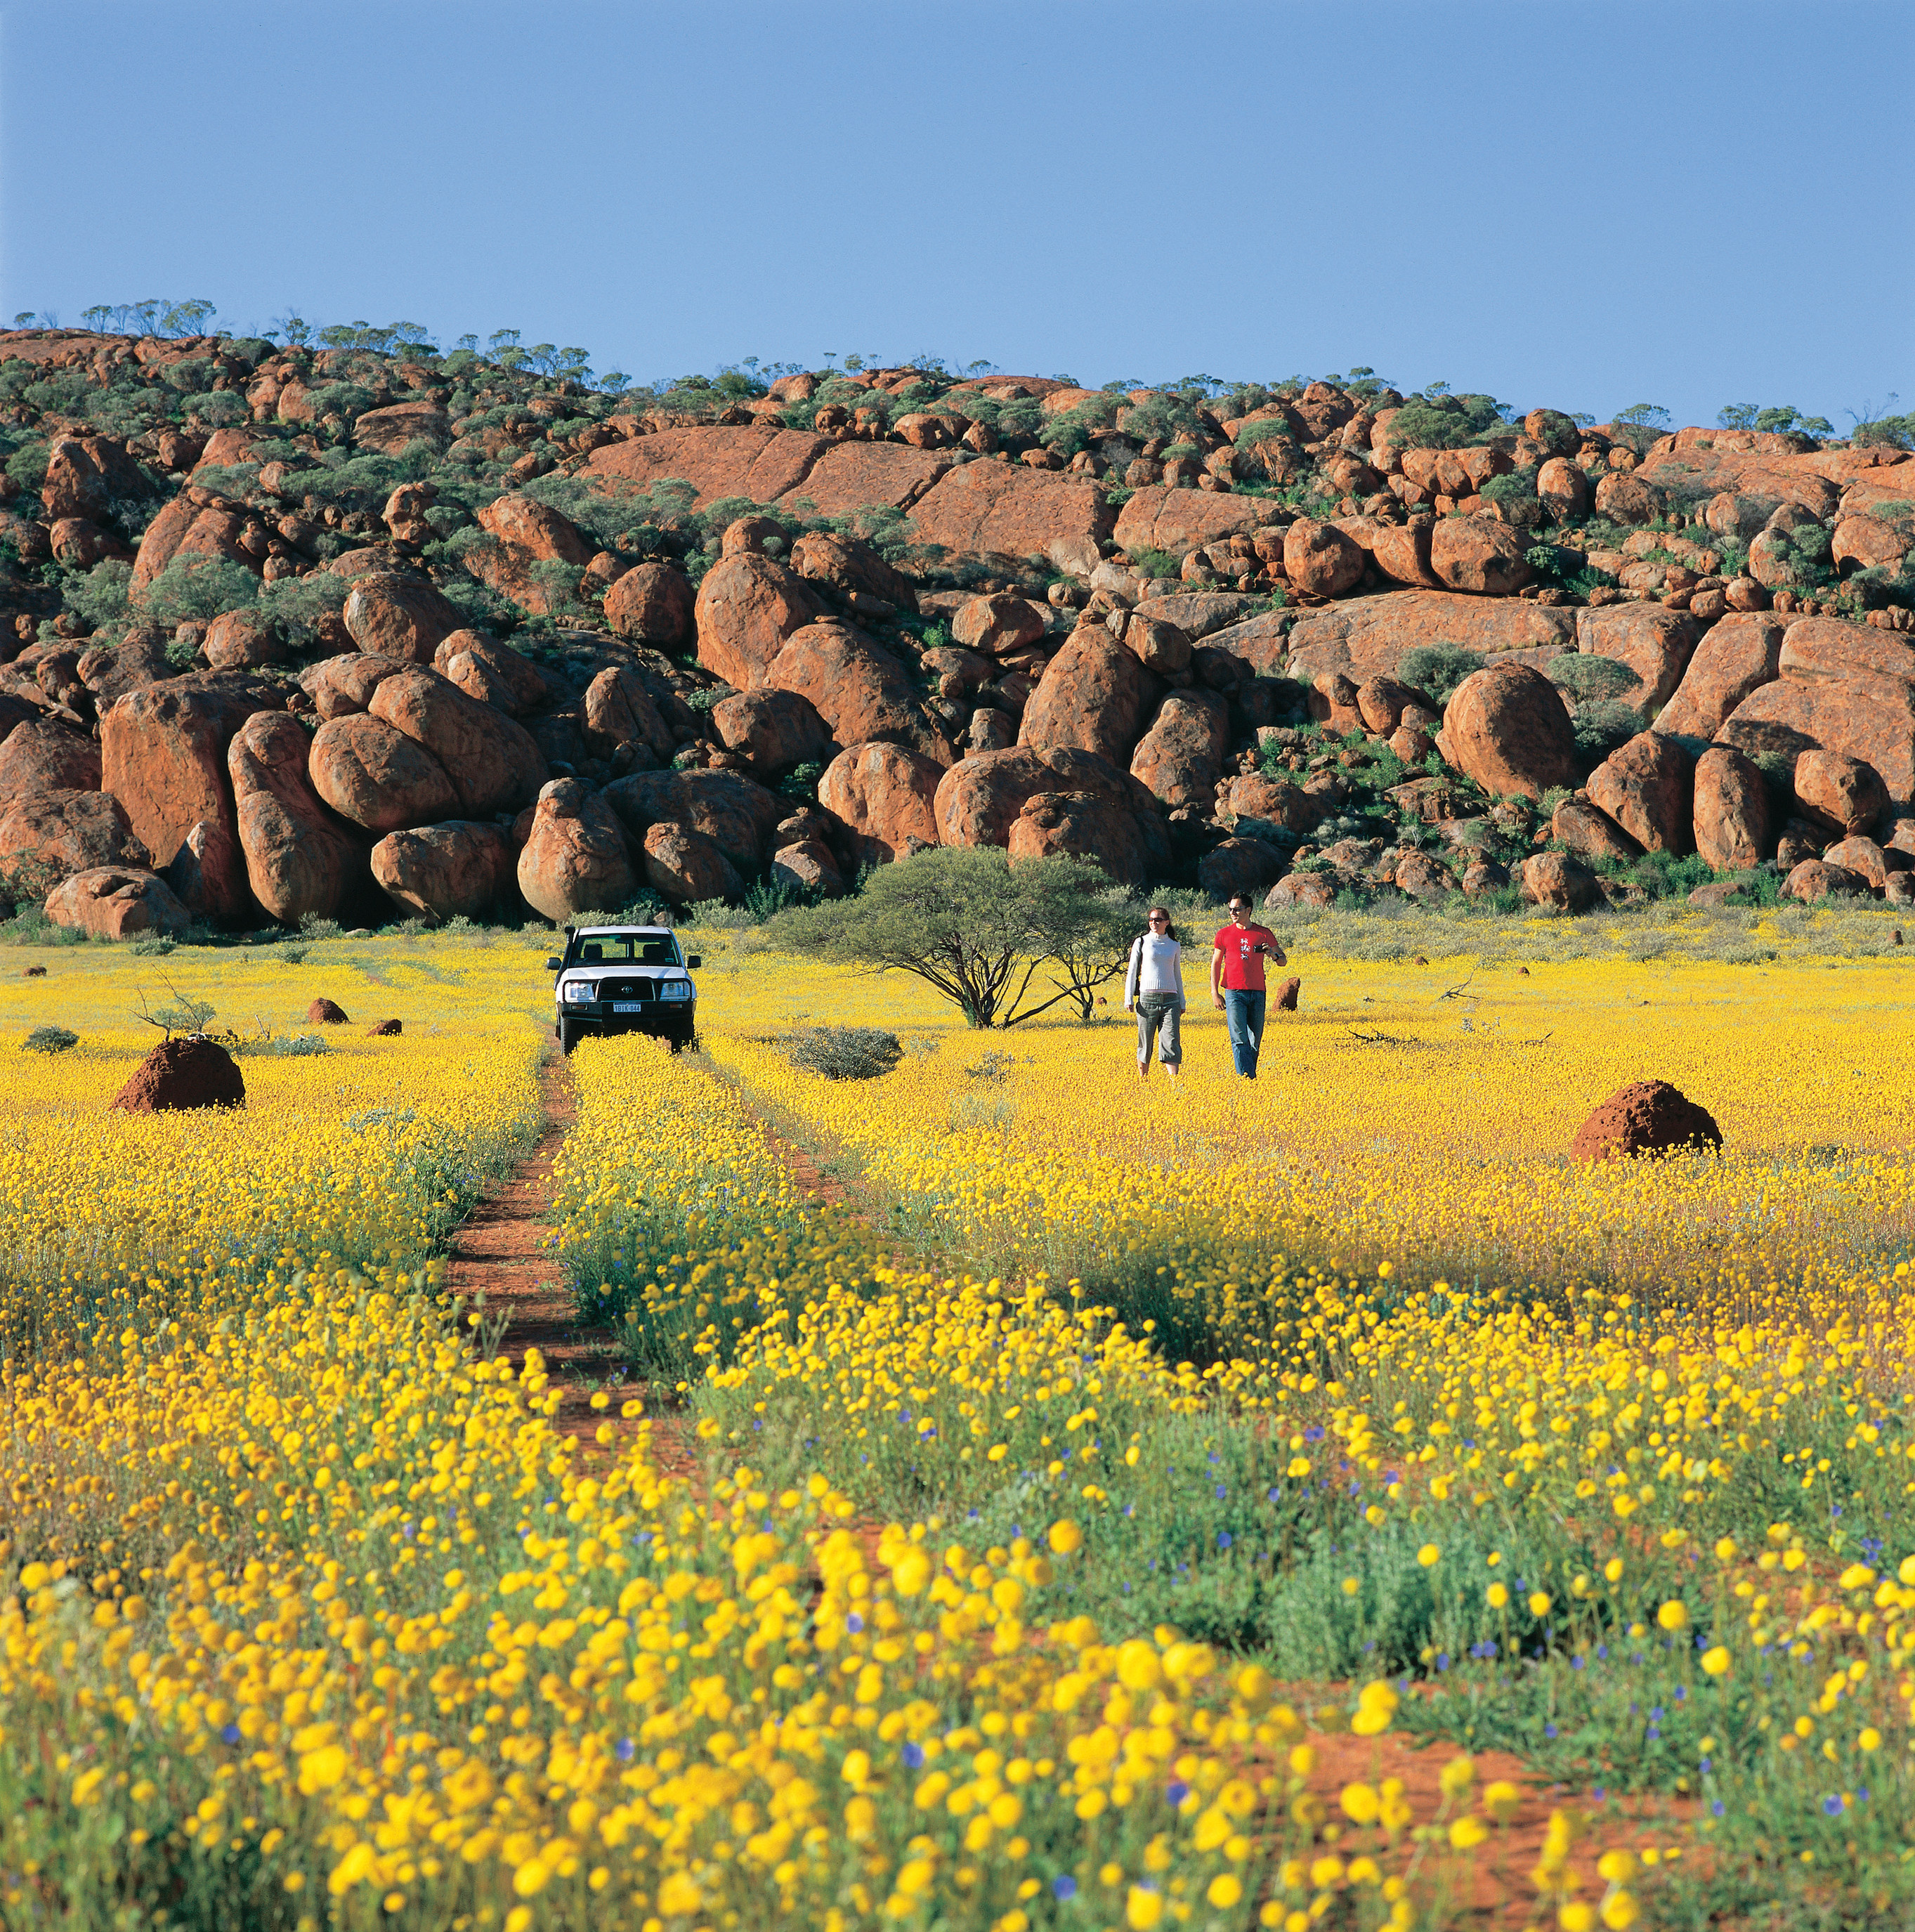 Experiencing the West Australian outback and its breathtaking wildflowers.